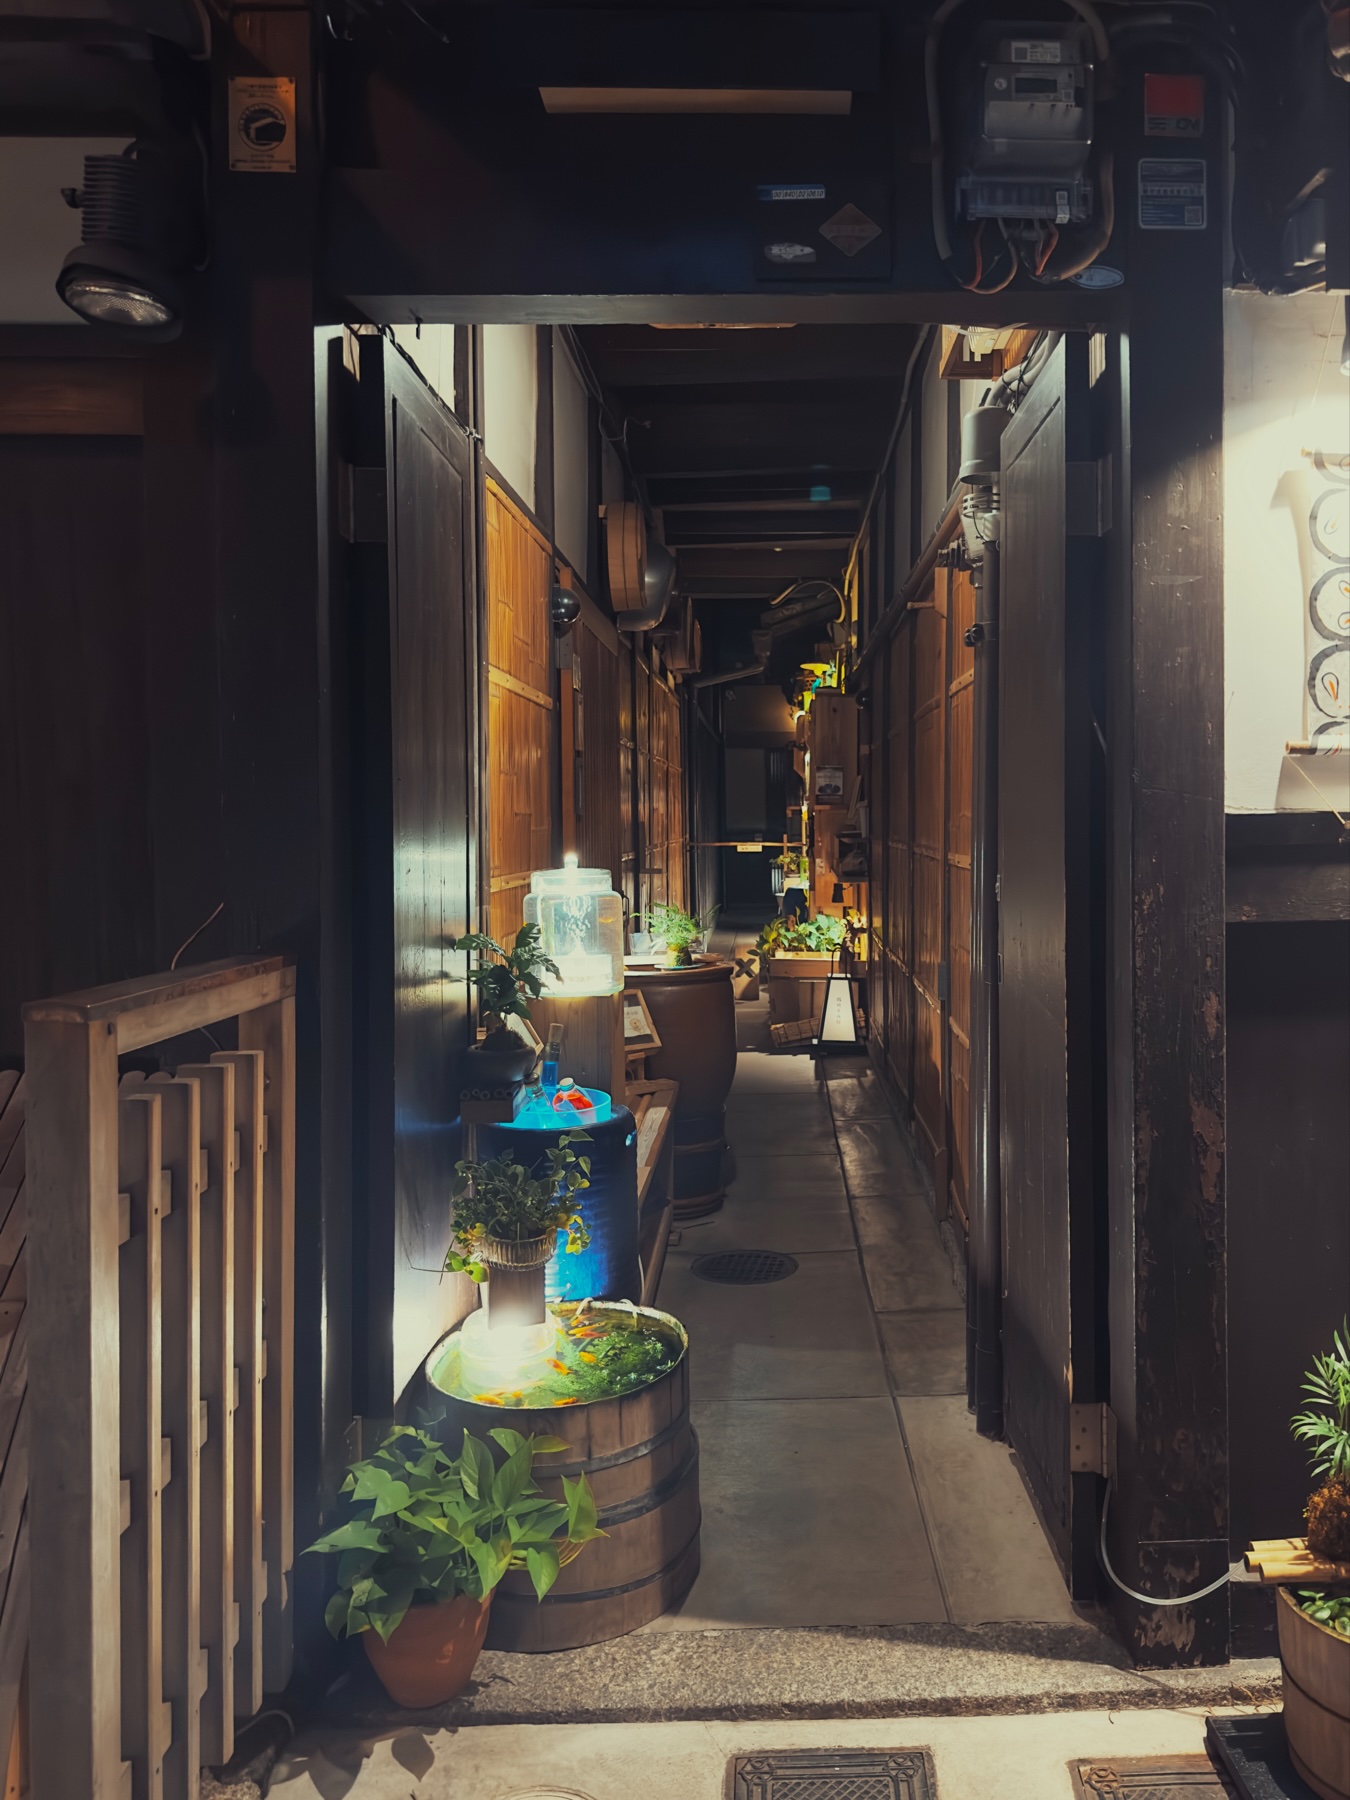 A wooden alleyway to one of the many Kyoto eateries